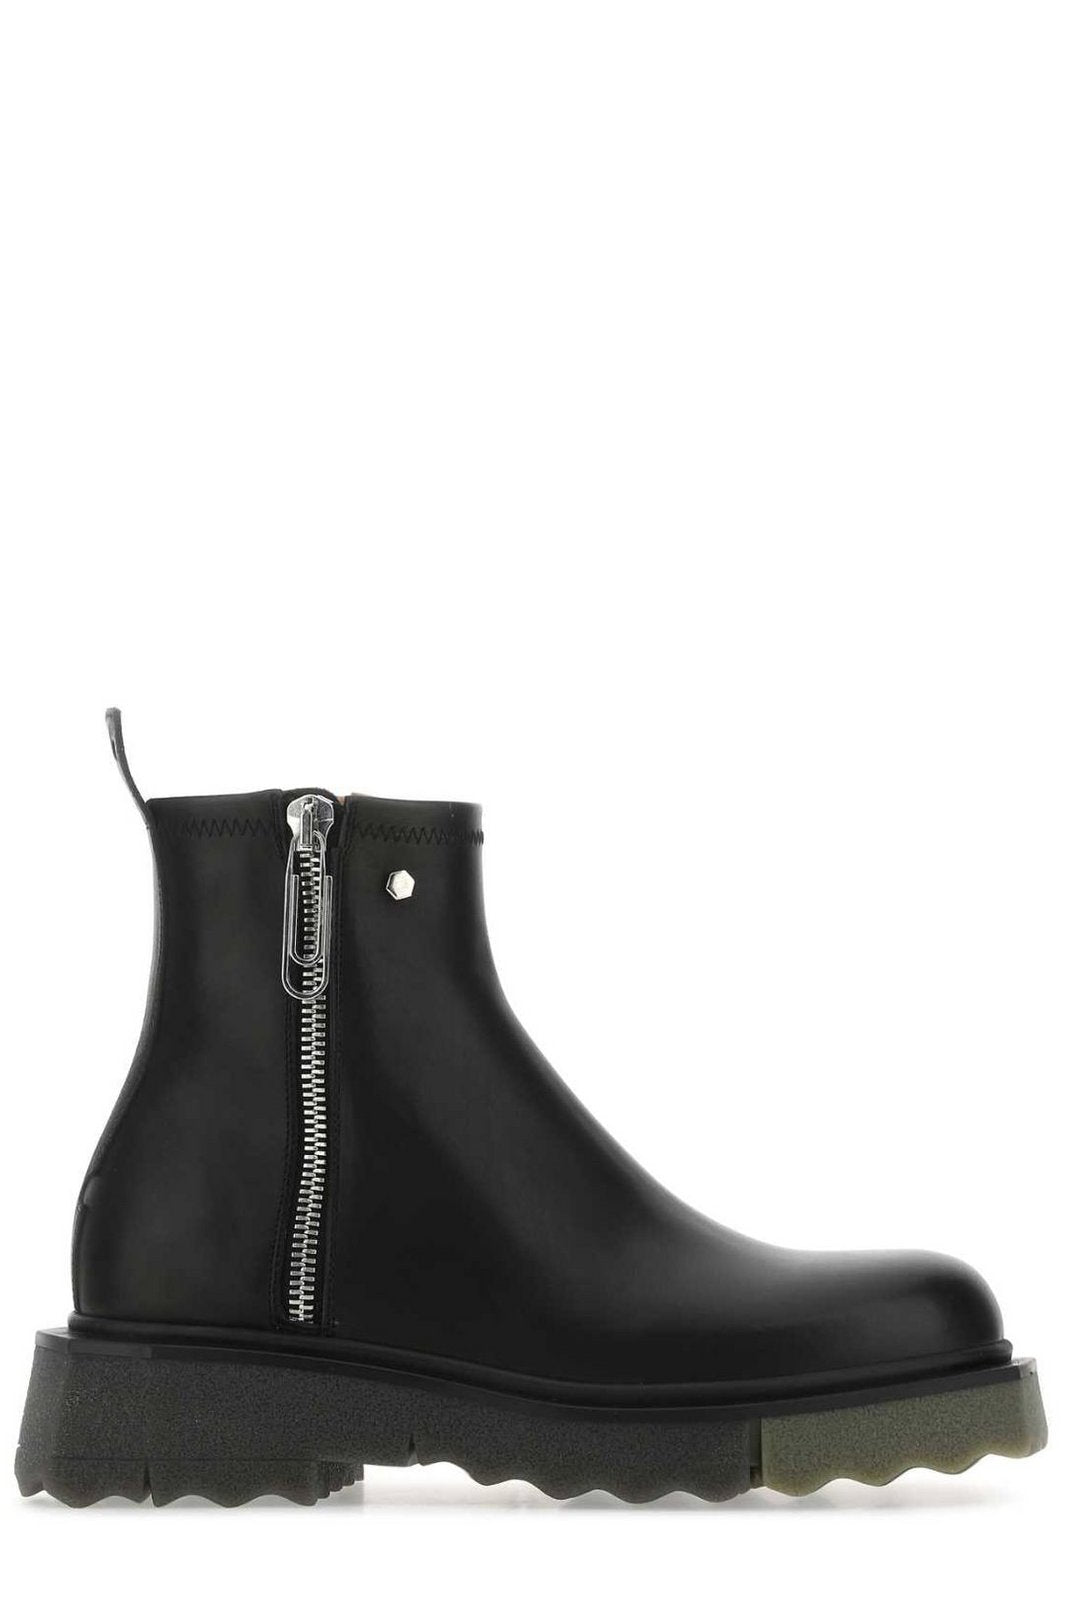 Off-White Round Toe Zip-Up Ankle Boots